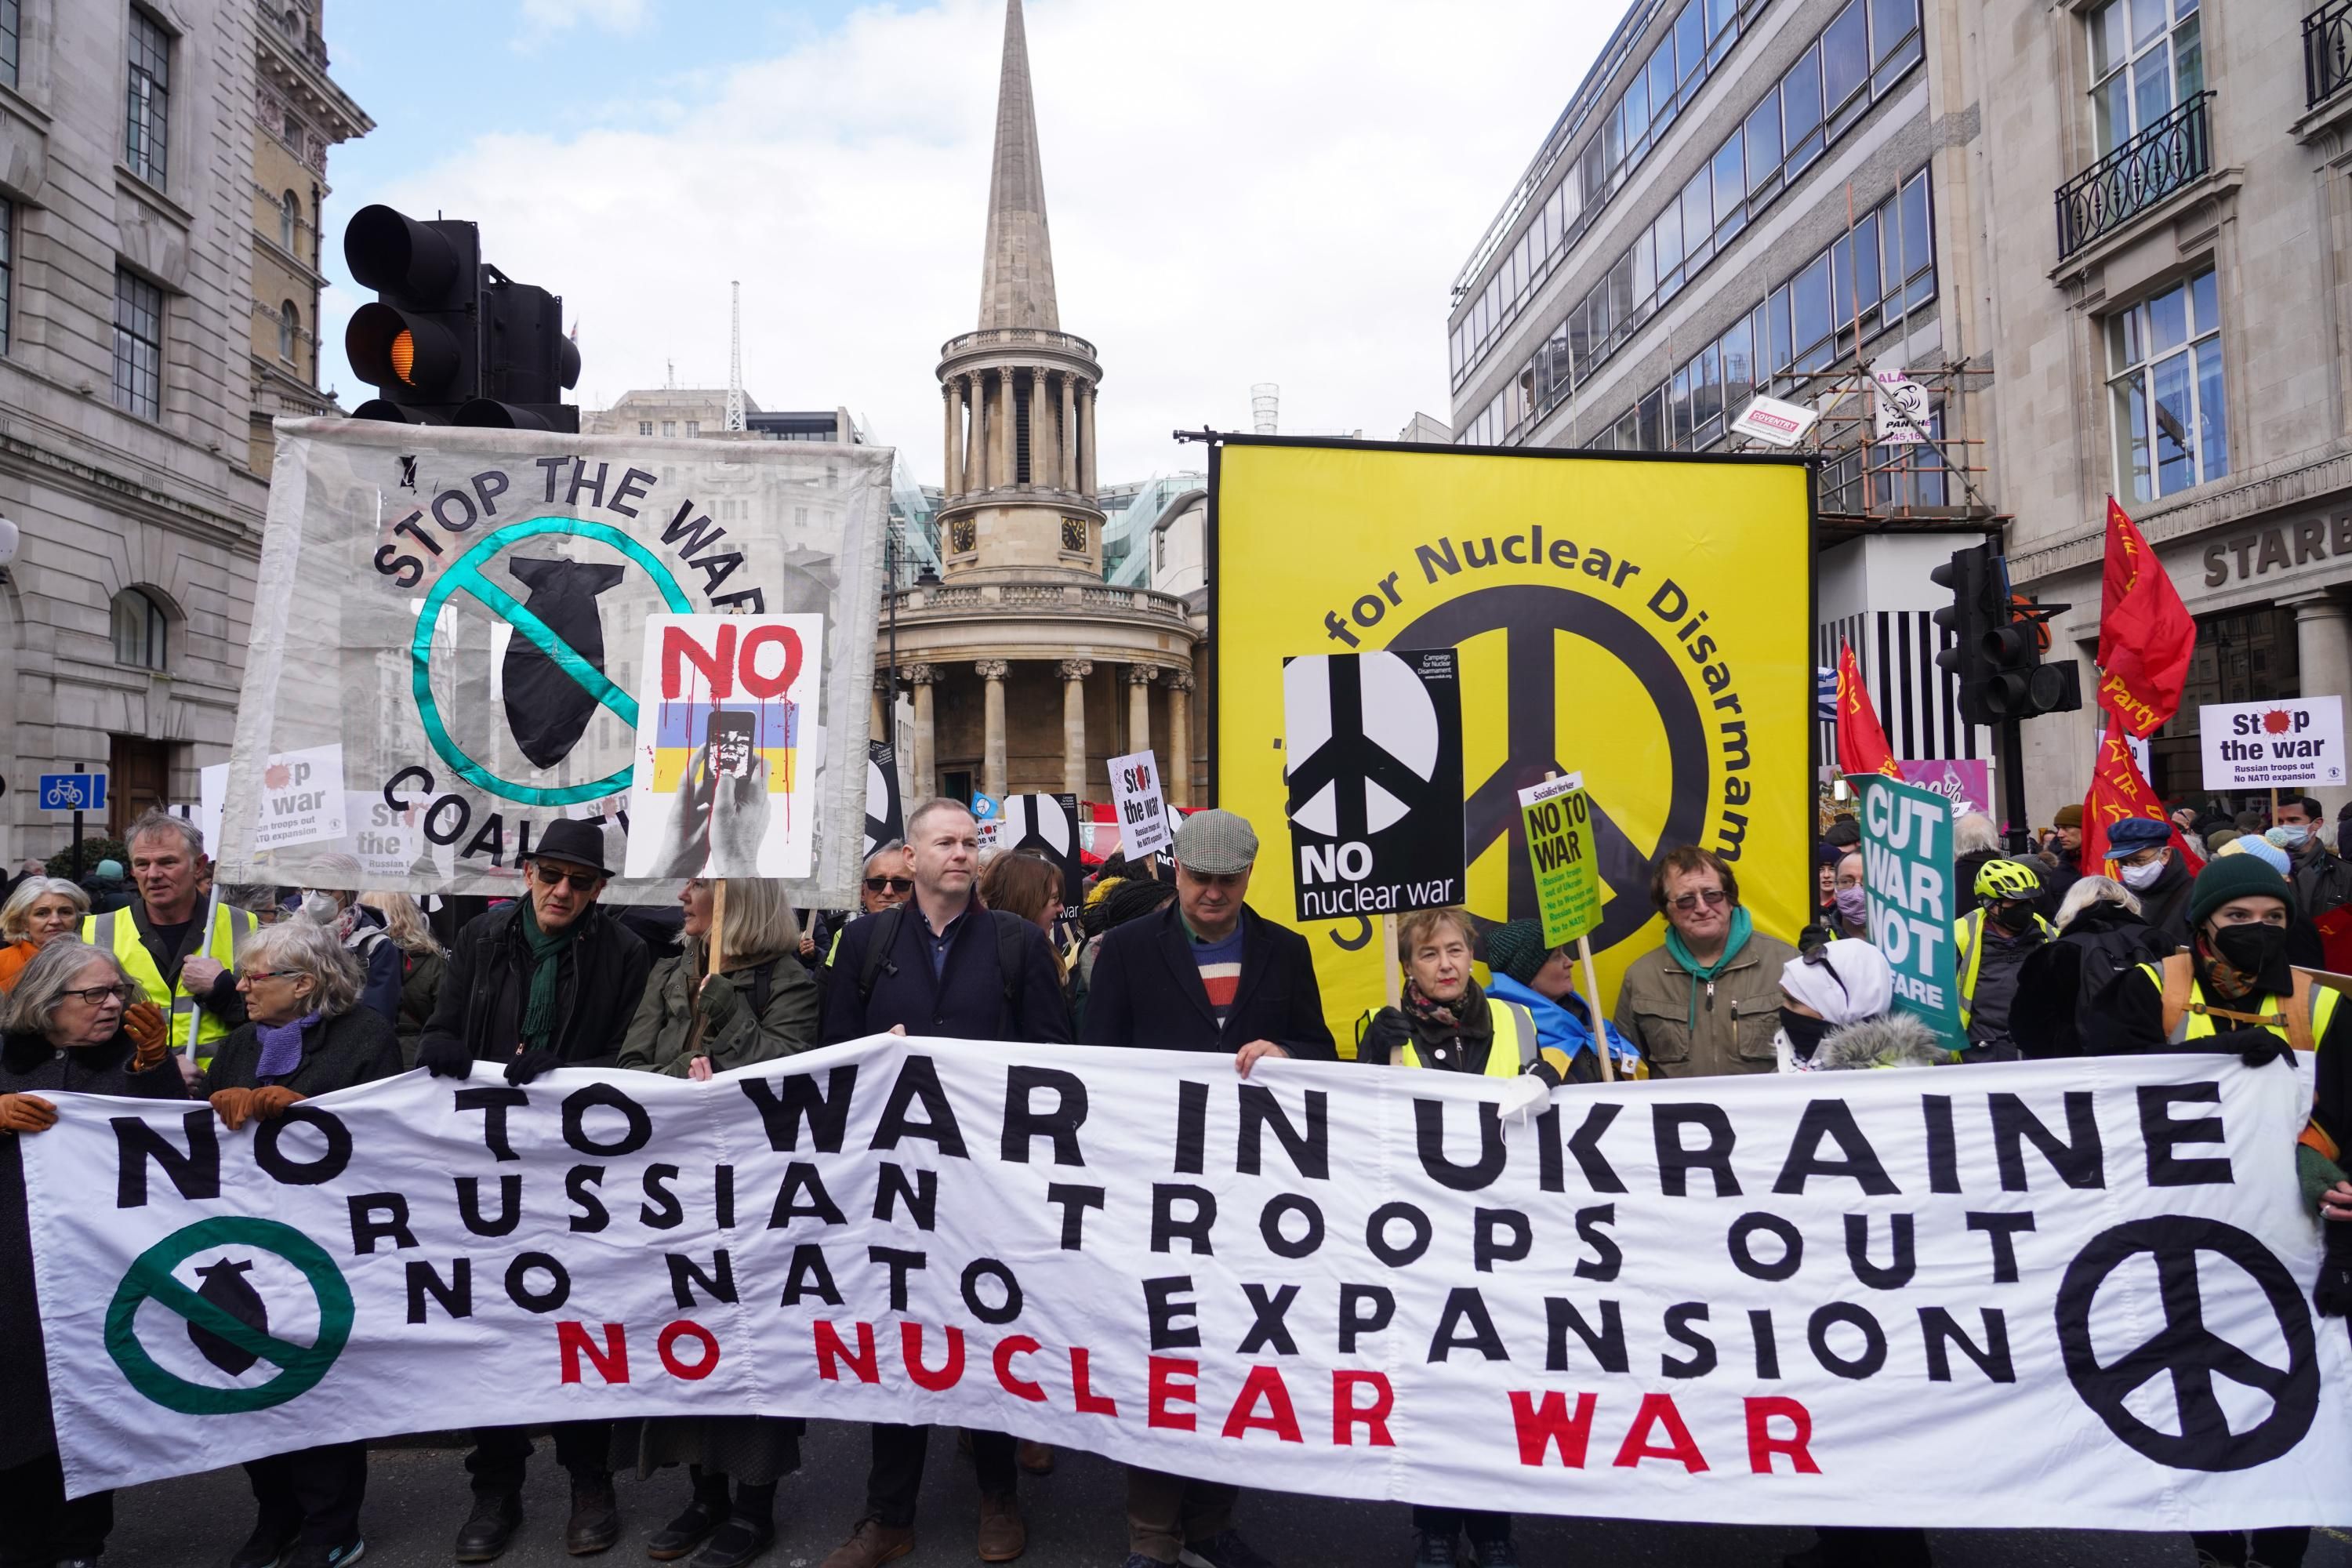 Thousands turned out to march for peace in Ukraine on February 6, 2022 in central London